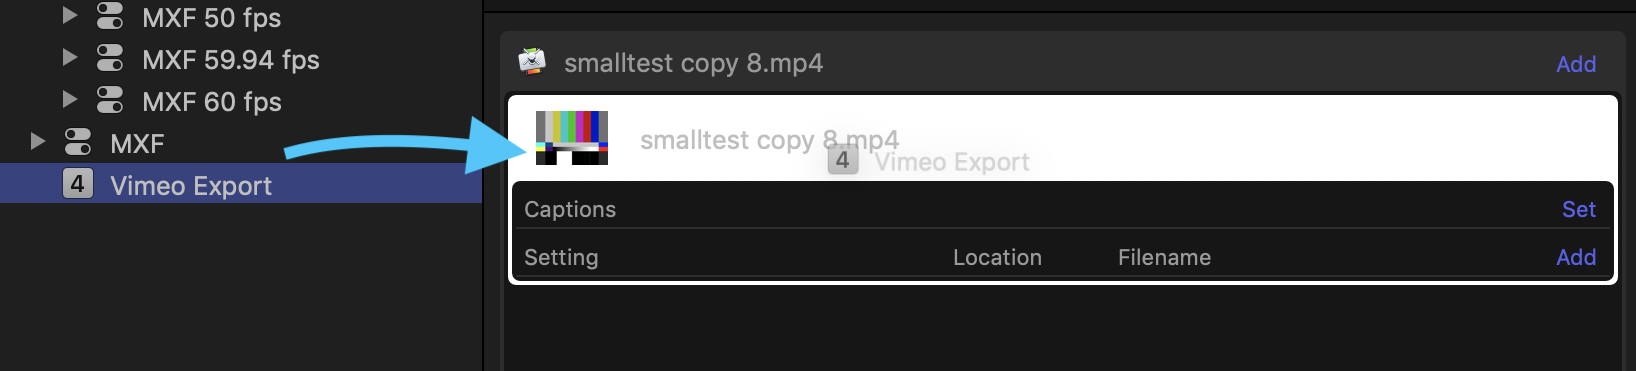 Screnshot showing that you can select and drag the Vimeo Export preset from the left settings menu to your file to apply it.